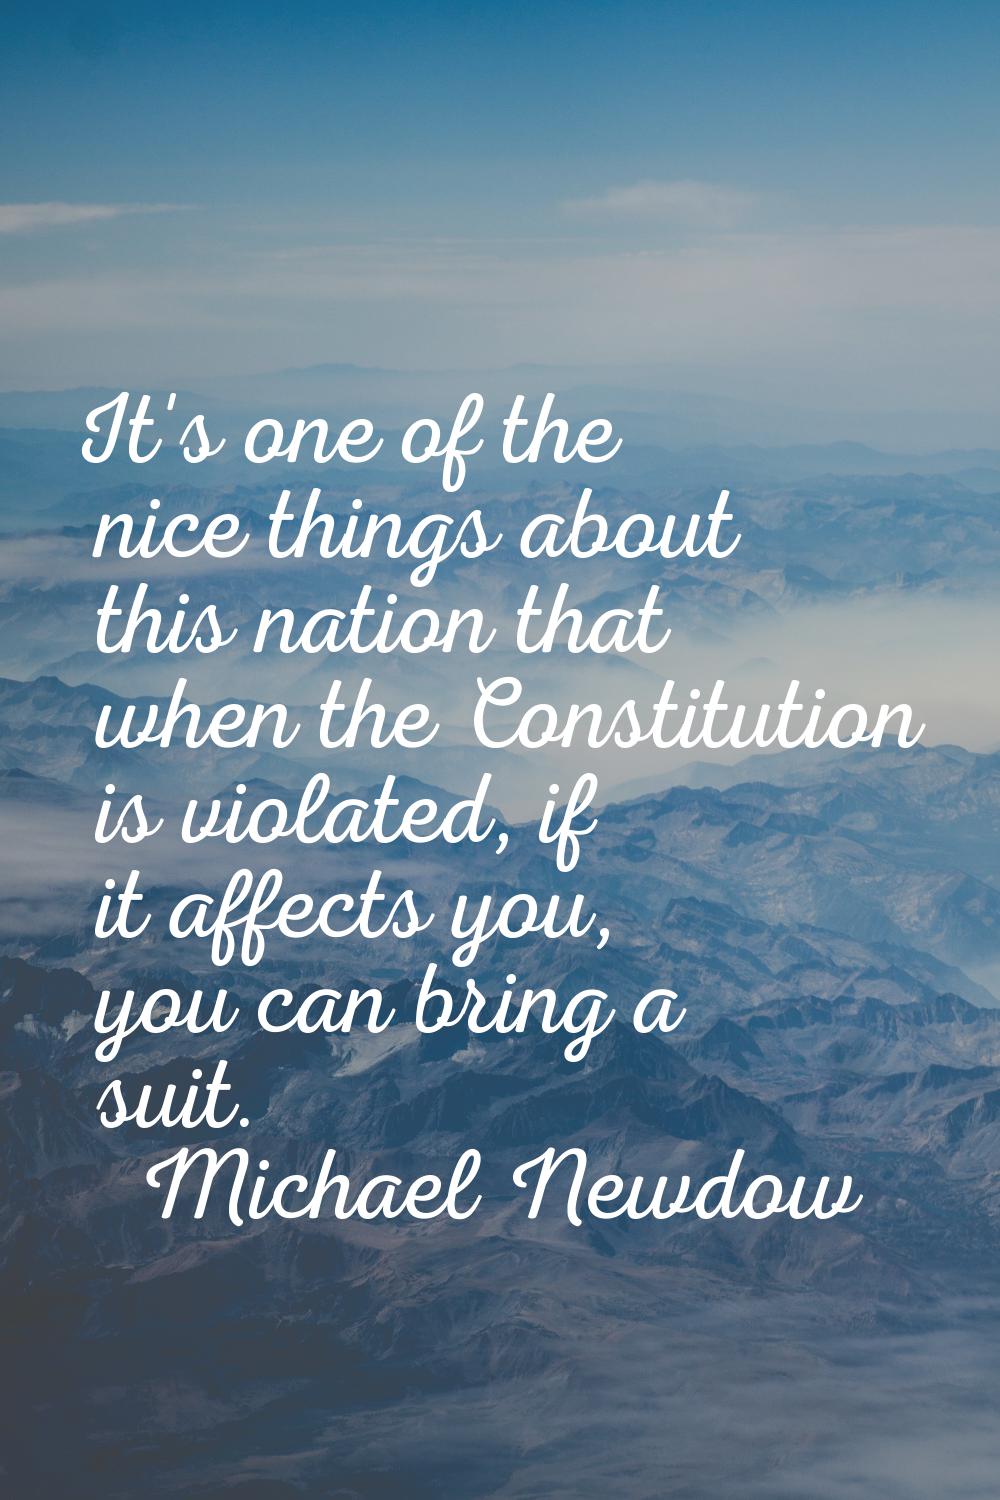 It's one of the nice things about this nation that when the Constitution is violated, if it affects